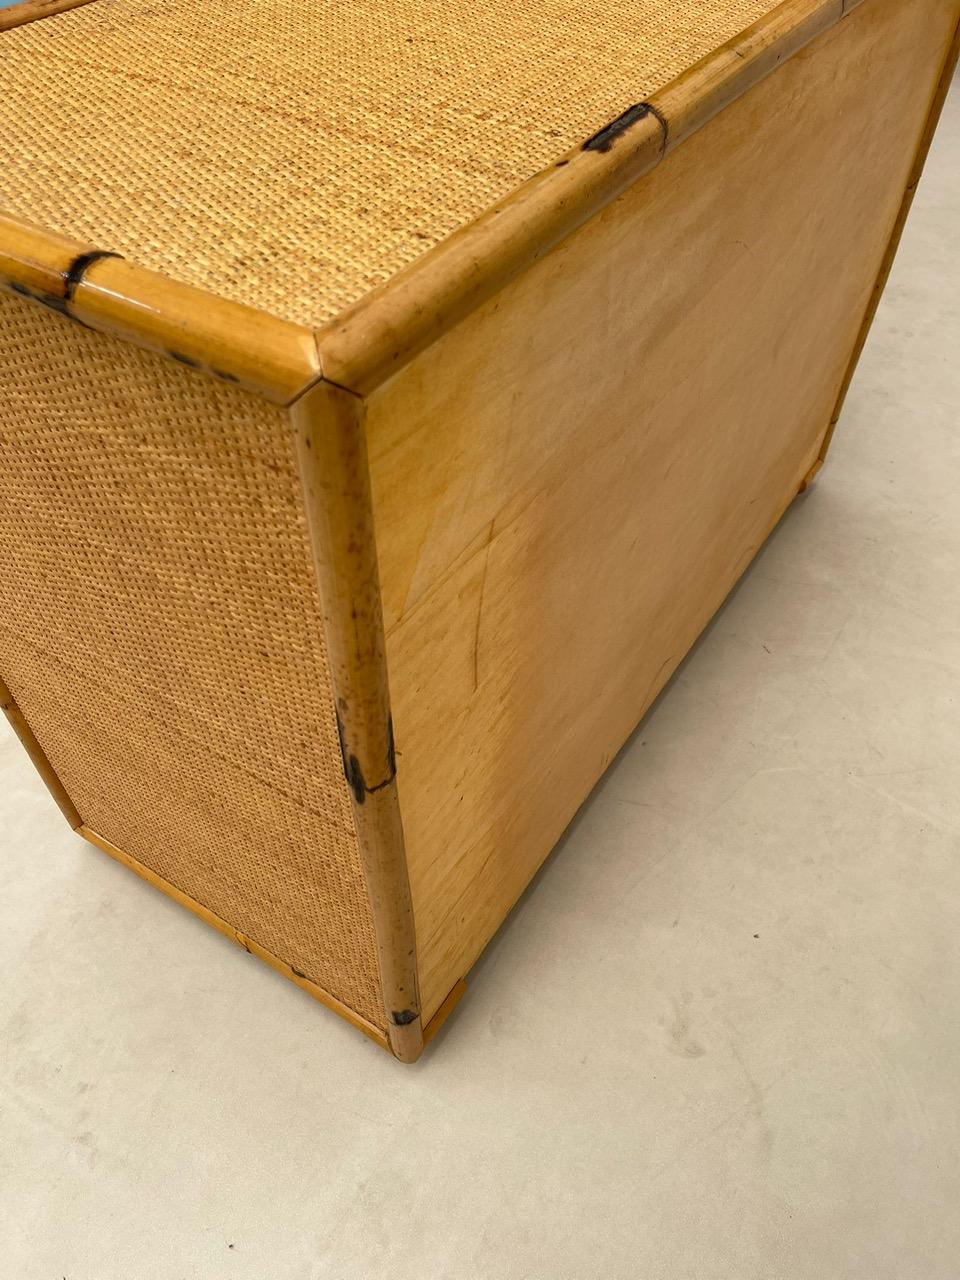 Dal Vera Bamboo and Wicker/Rattan Chest of Drawers, Italy 1960s For Sale 6